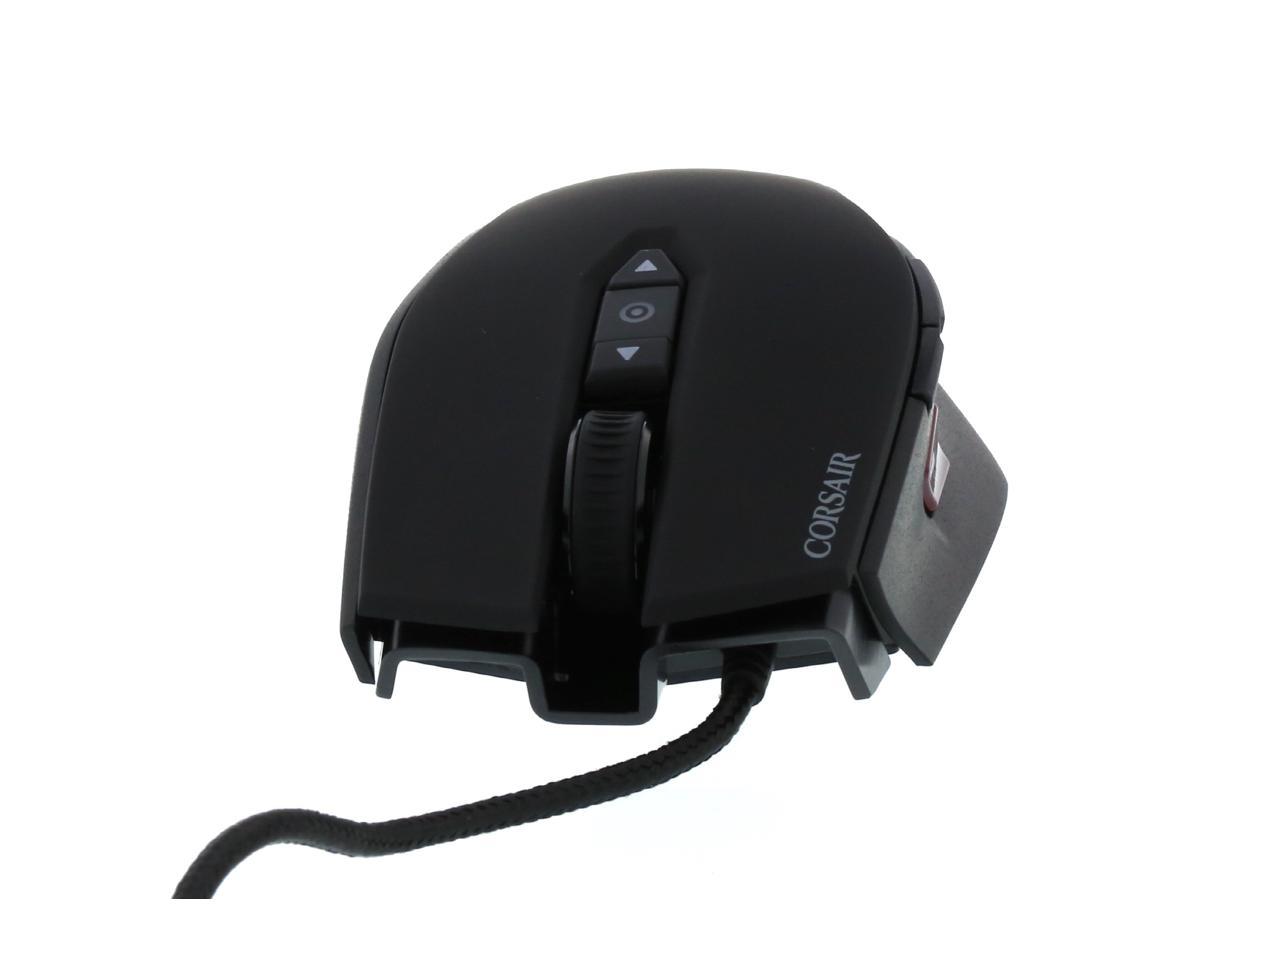 m 65 mouse configuration tool for mac